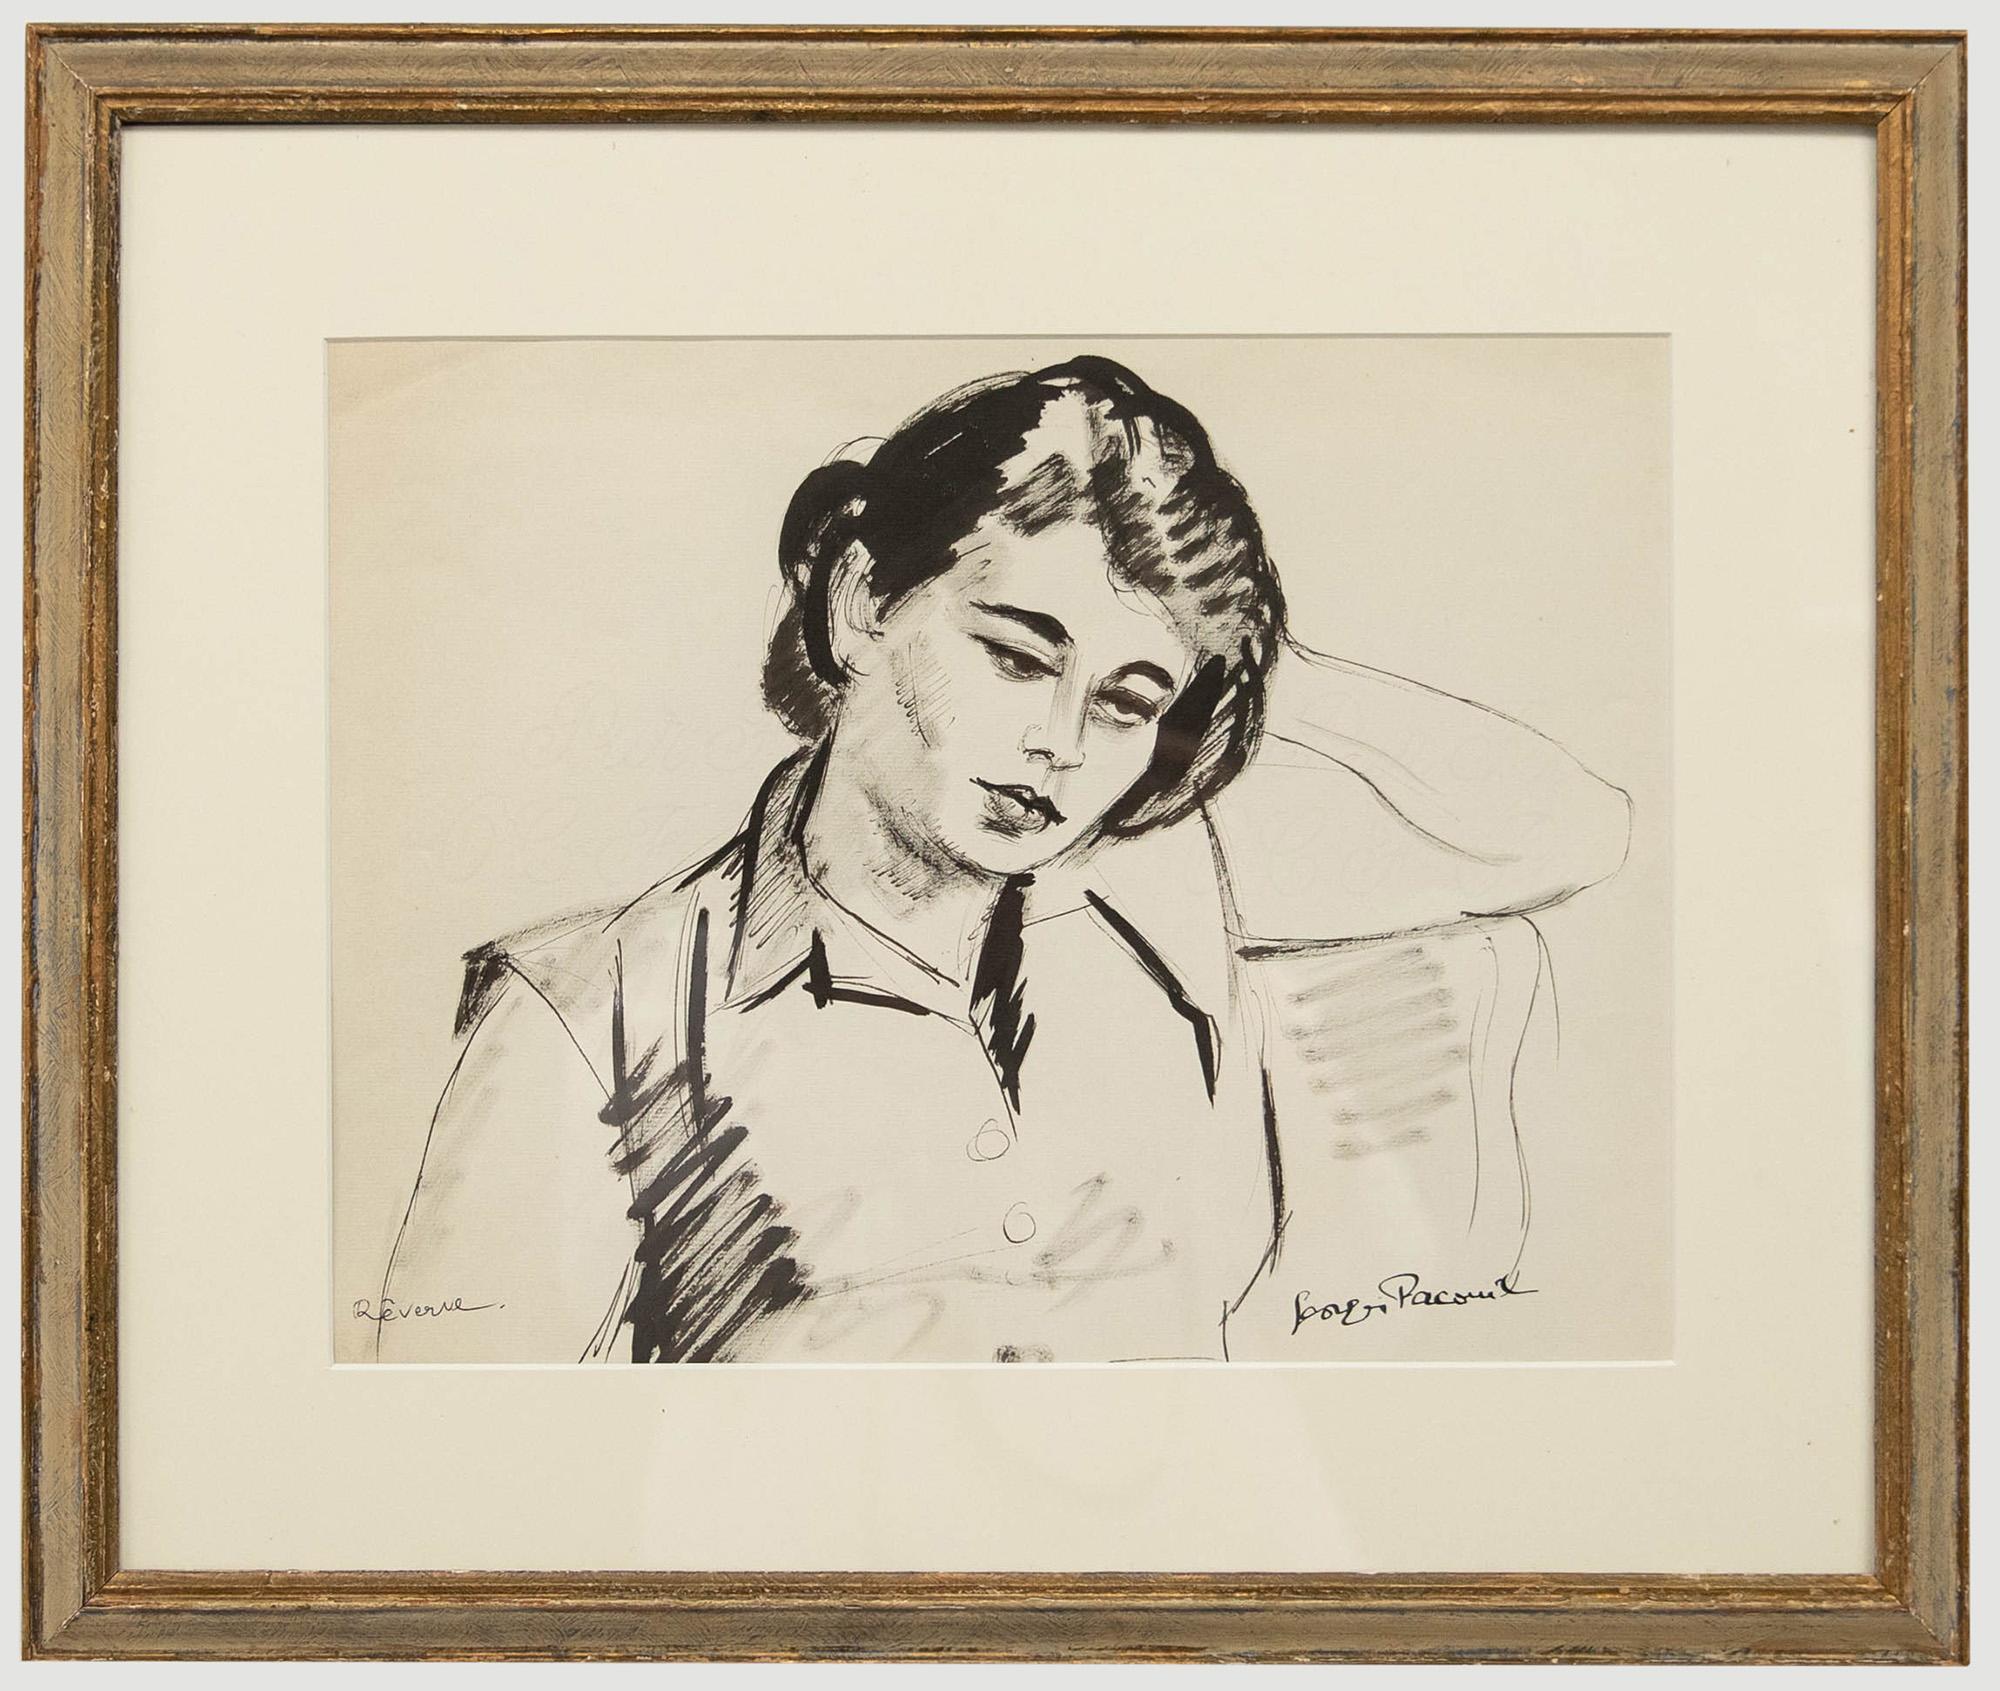 Unknown Portrait - Georges Pacouil (1903-1996) - Mid 20th Century India Ink, Reverie